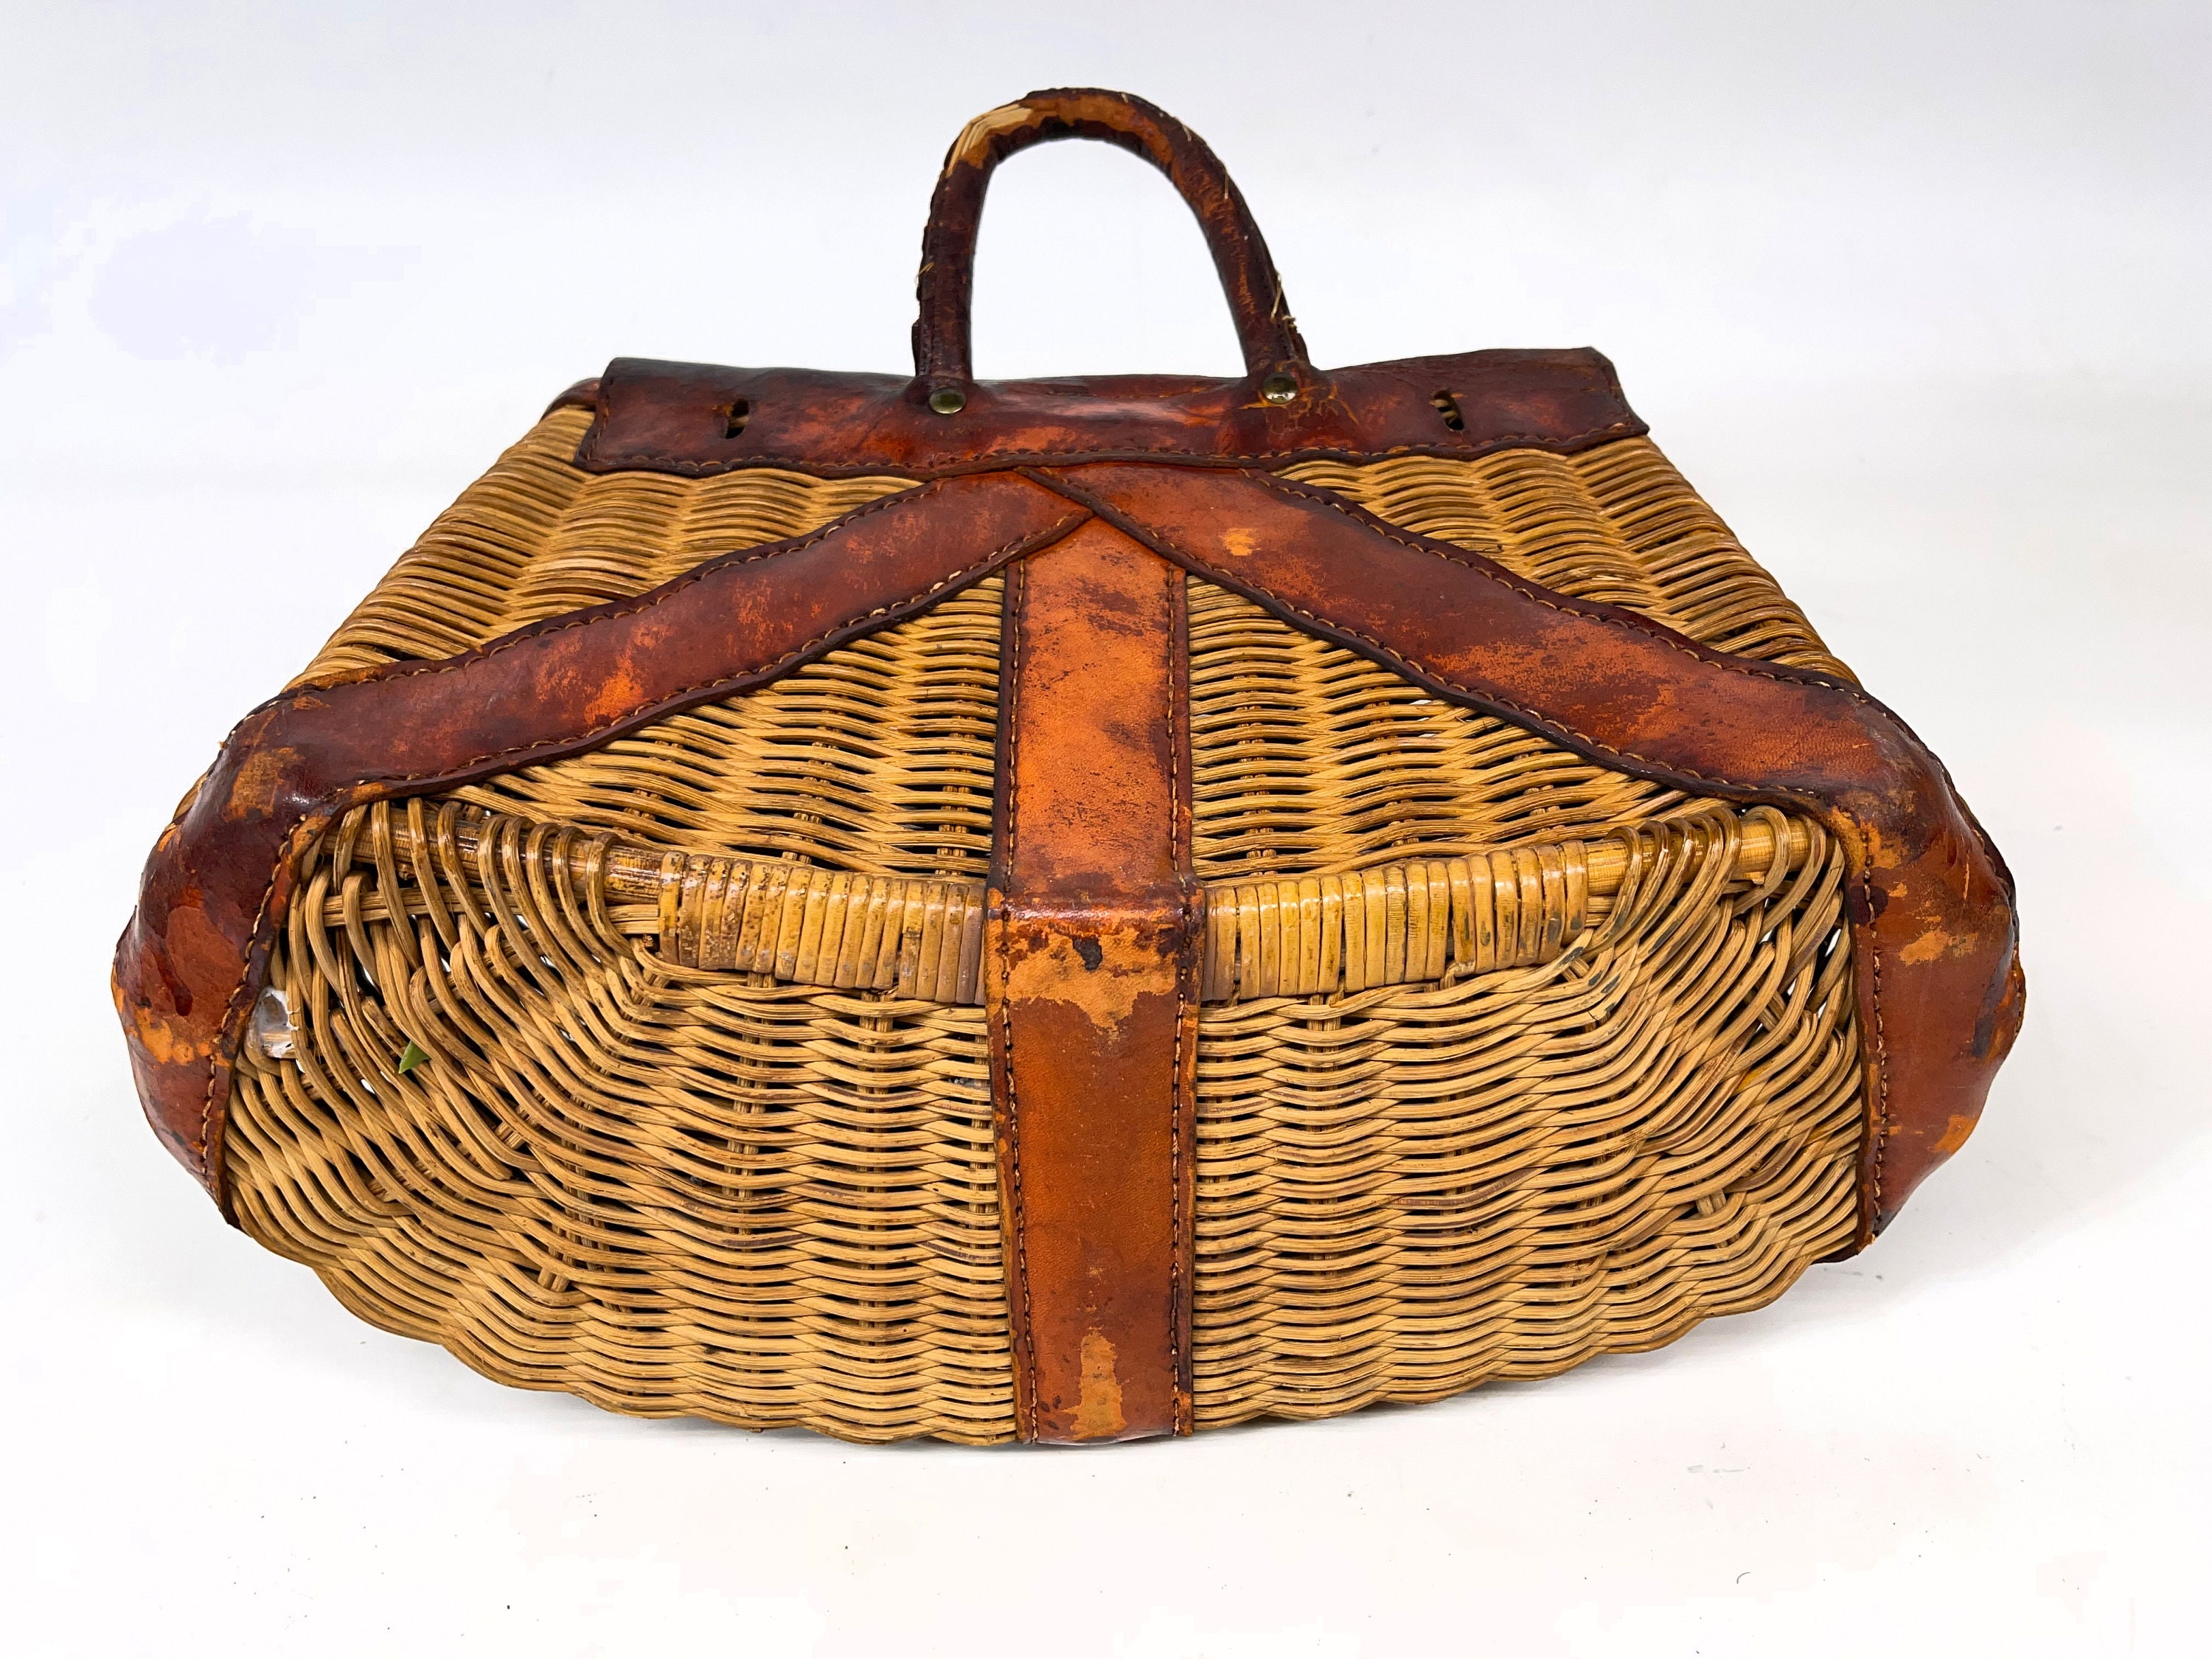 Vintage Fishing Creel, Wicker Basket, Rustic Cabin and Lodge Decor